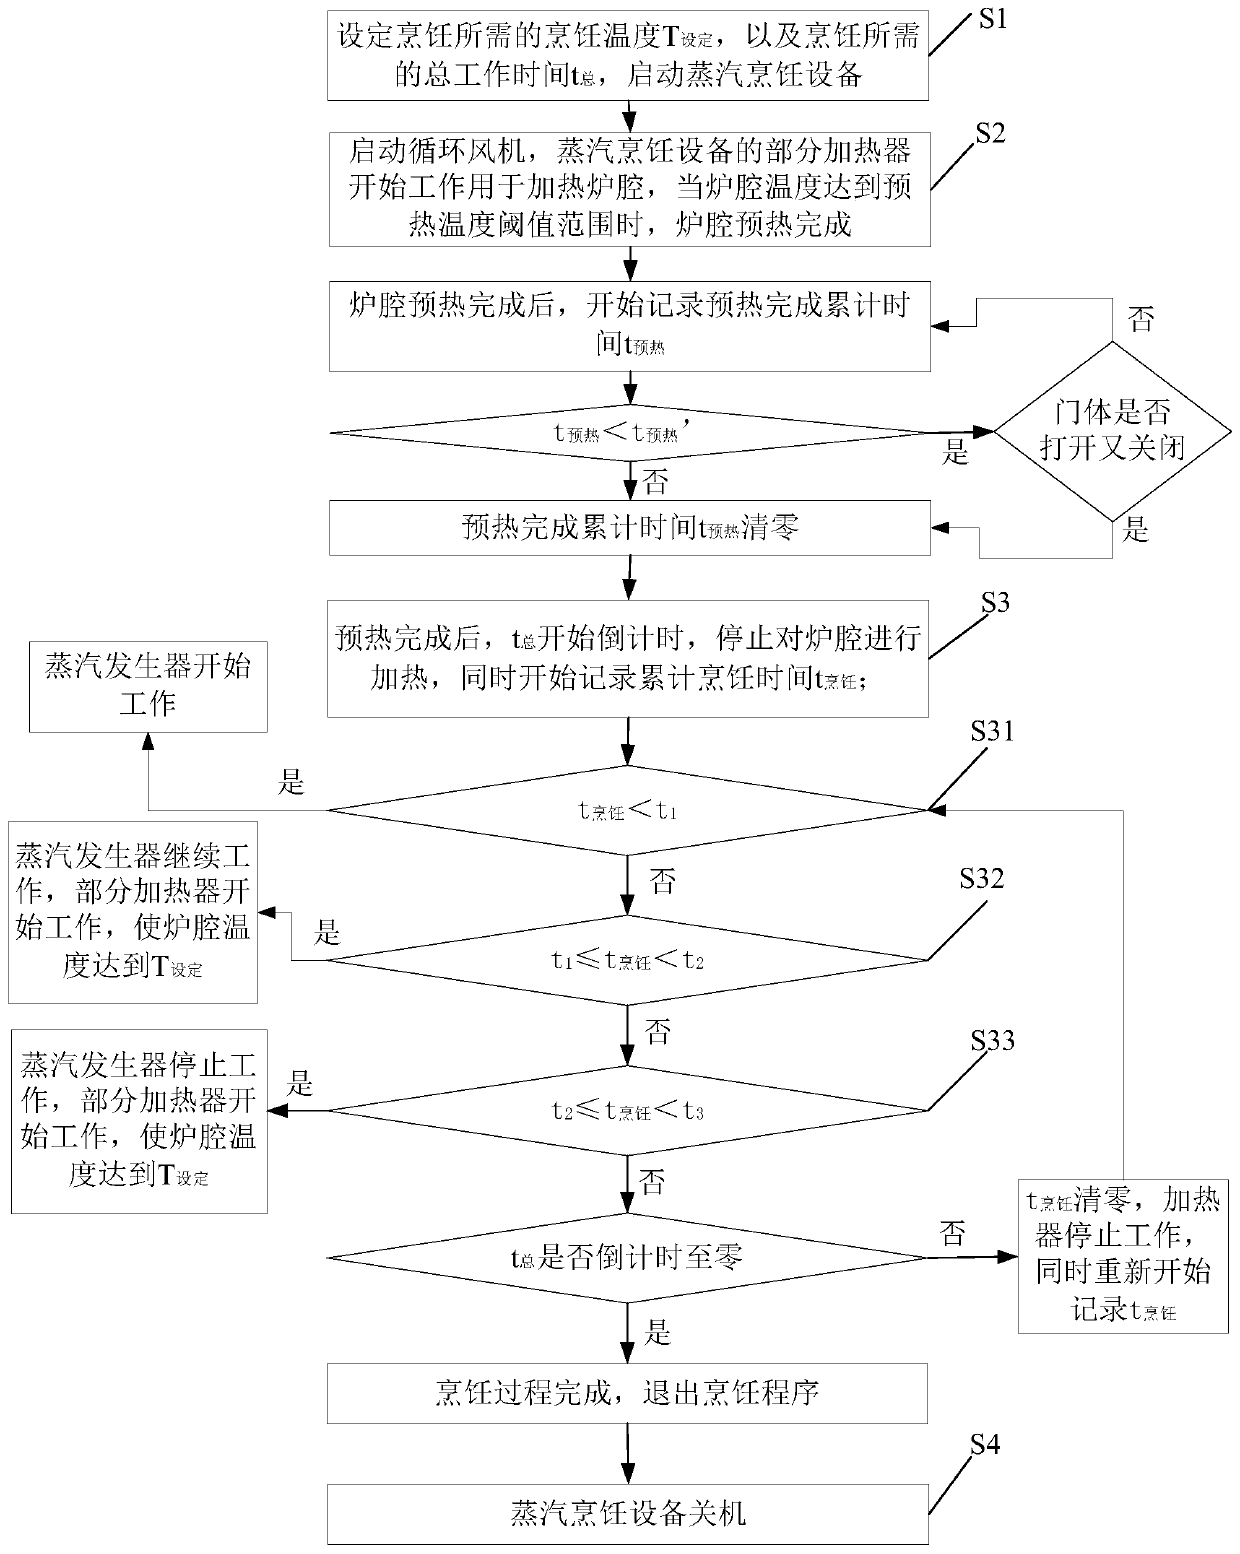 Control method for furnace chamber temperature and steam quantity of steam cooking equipment